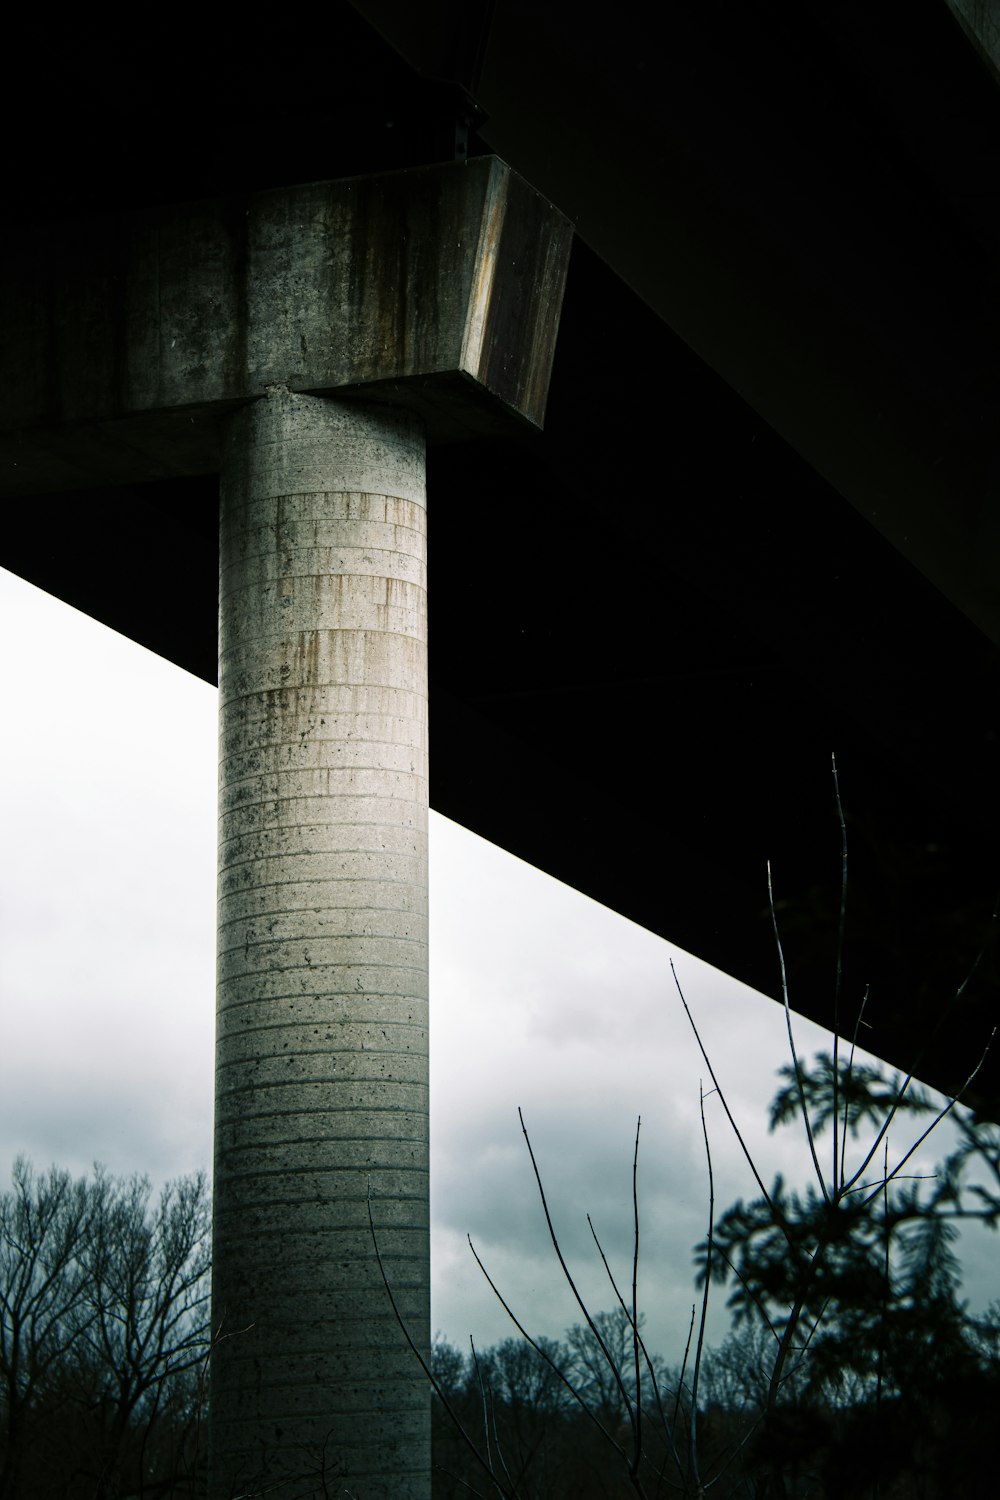 a view of the underside of a bridge